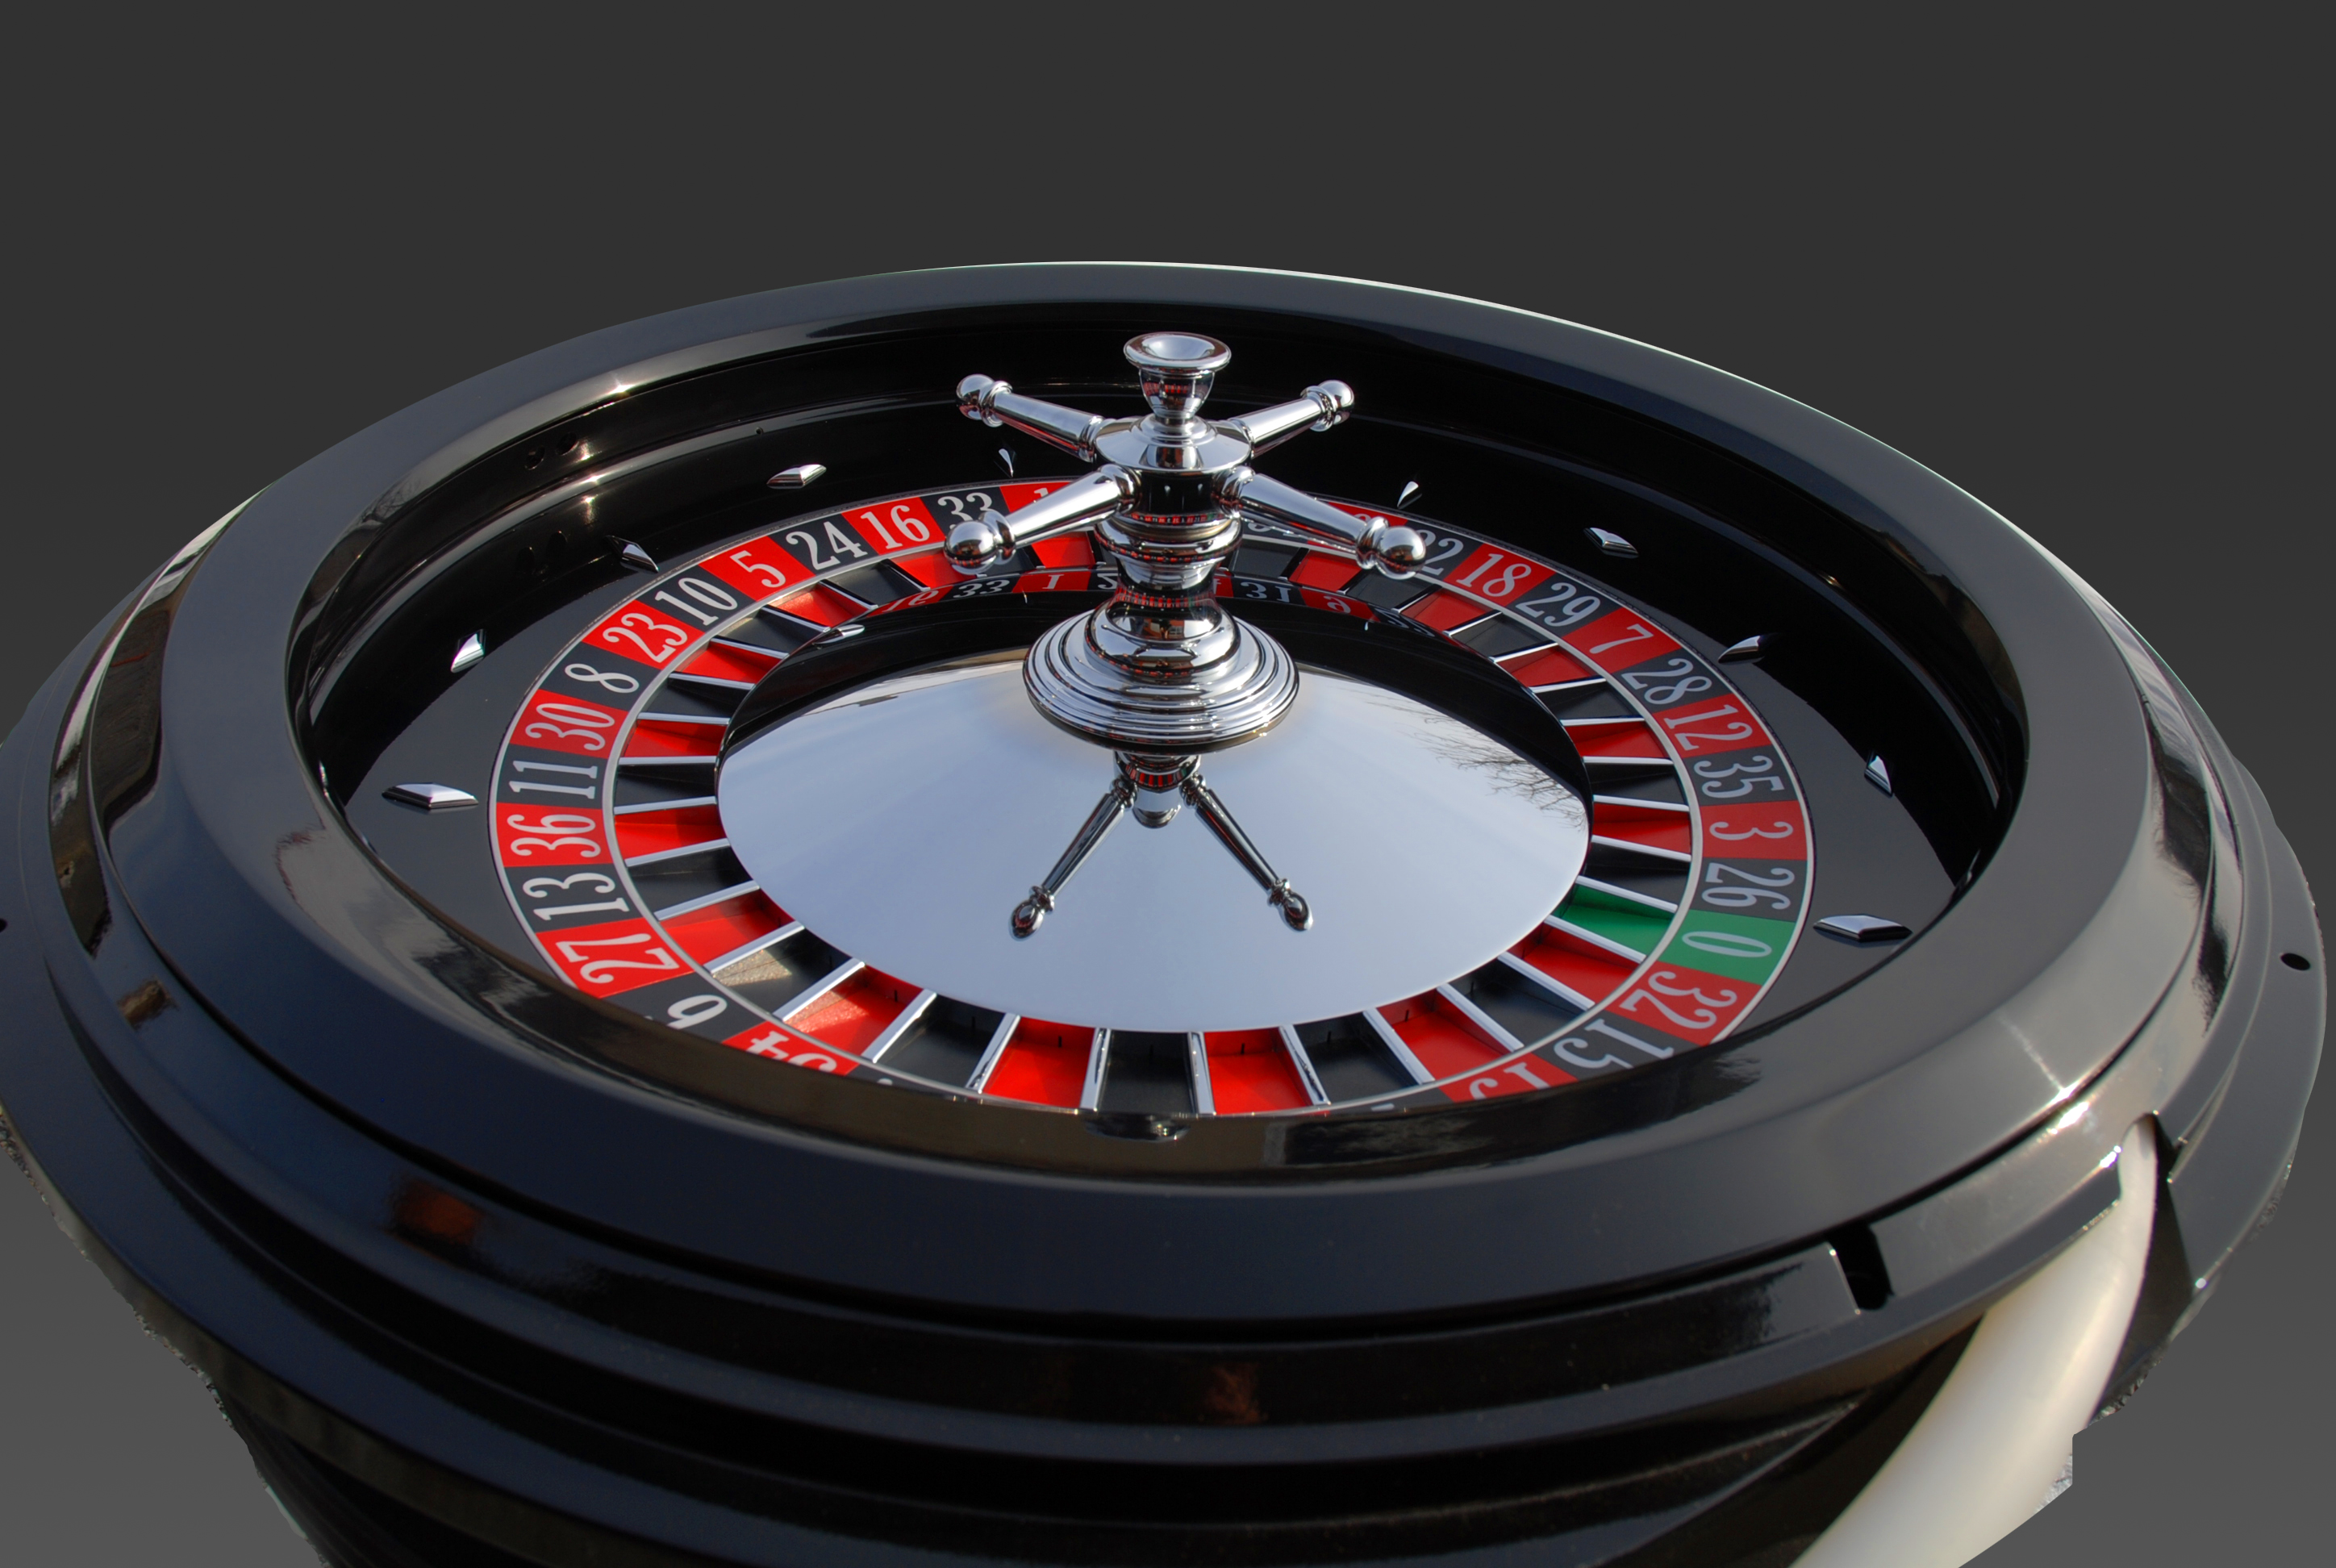 Automated roulette wheels